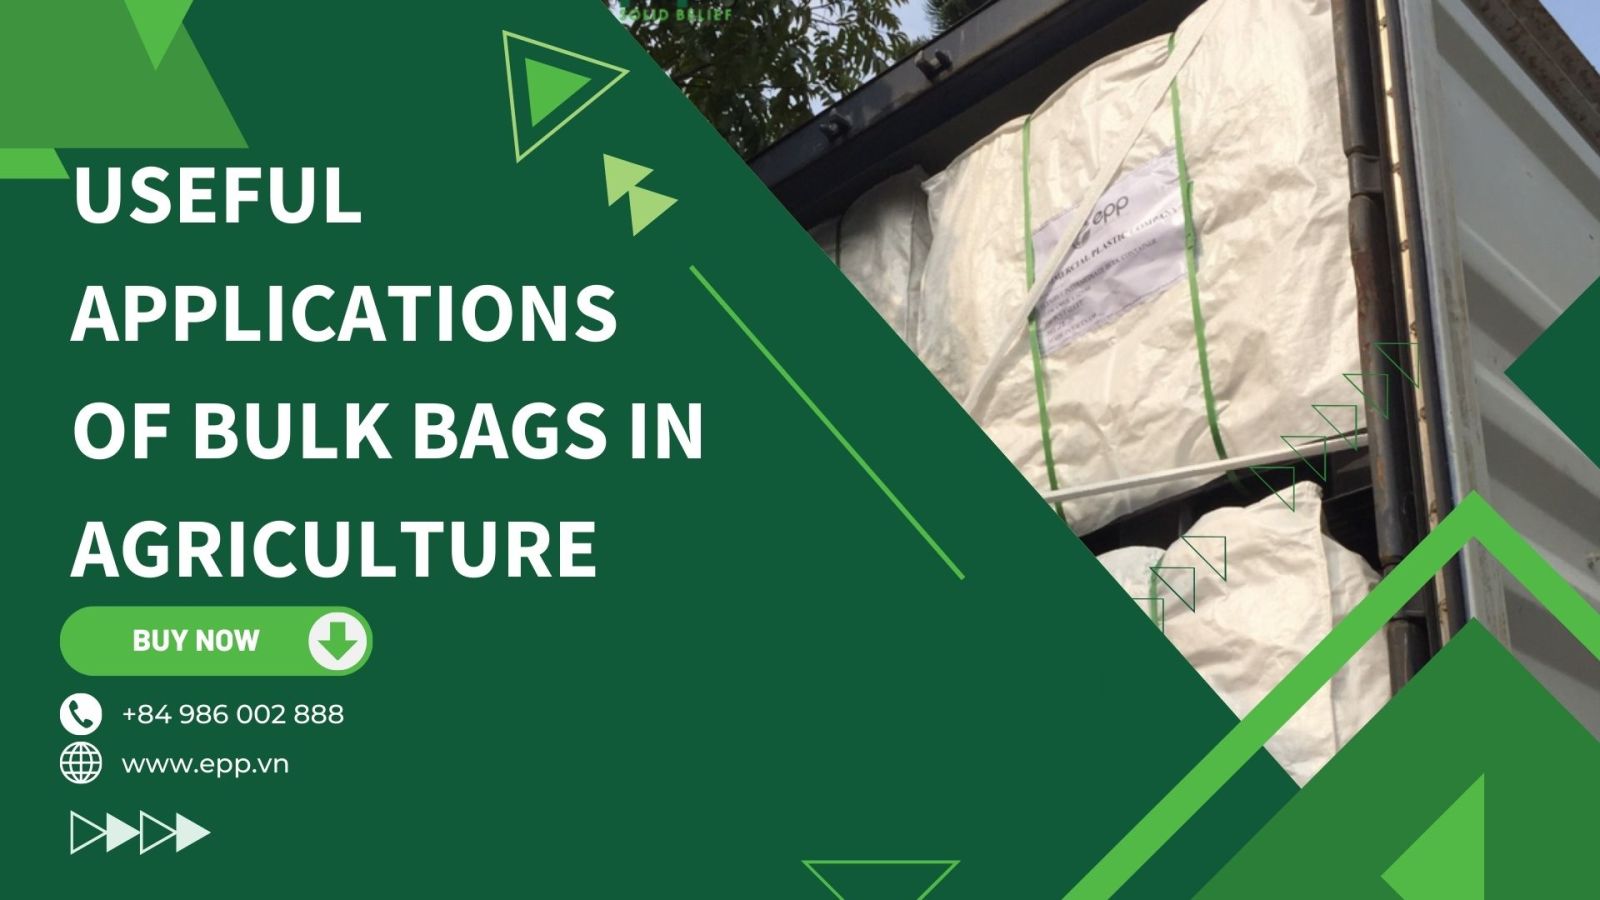 Useful-applications-of-bulk-bags-in-agriculture.jpg